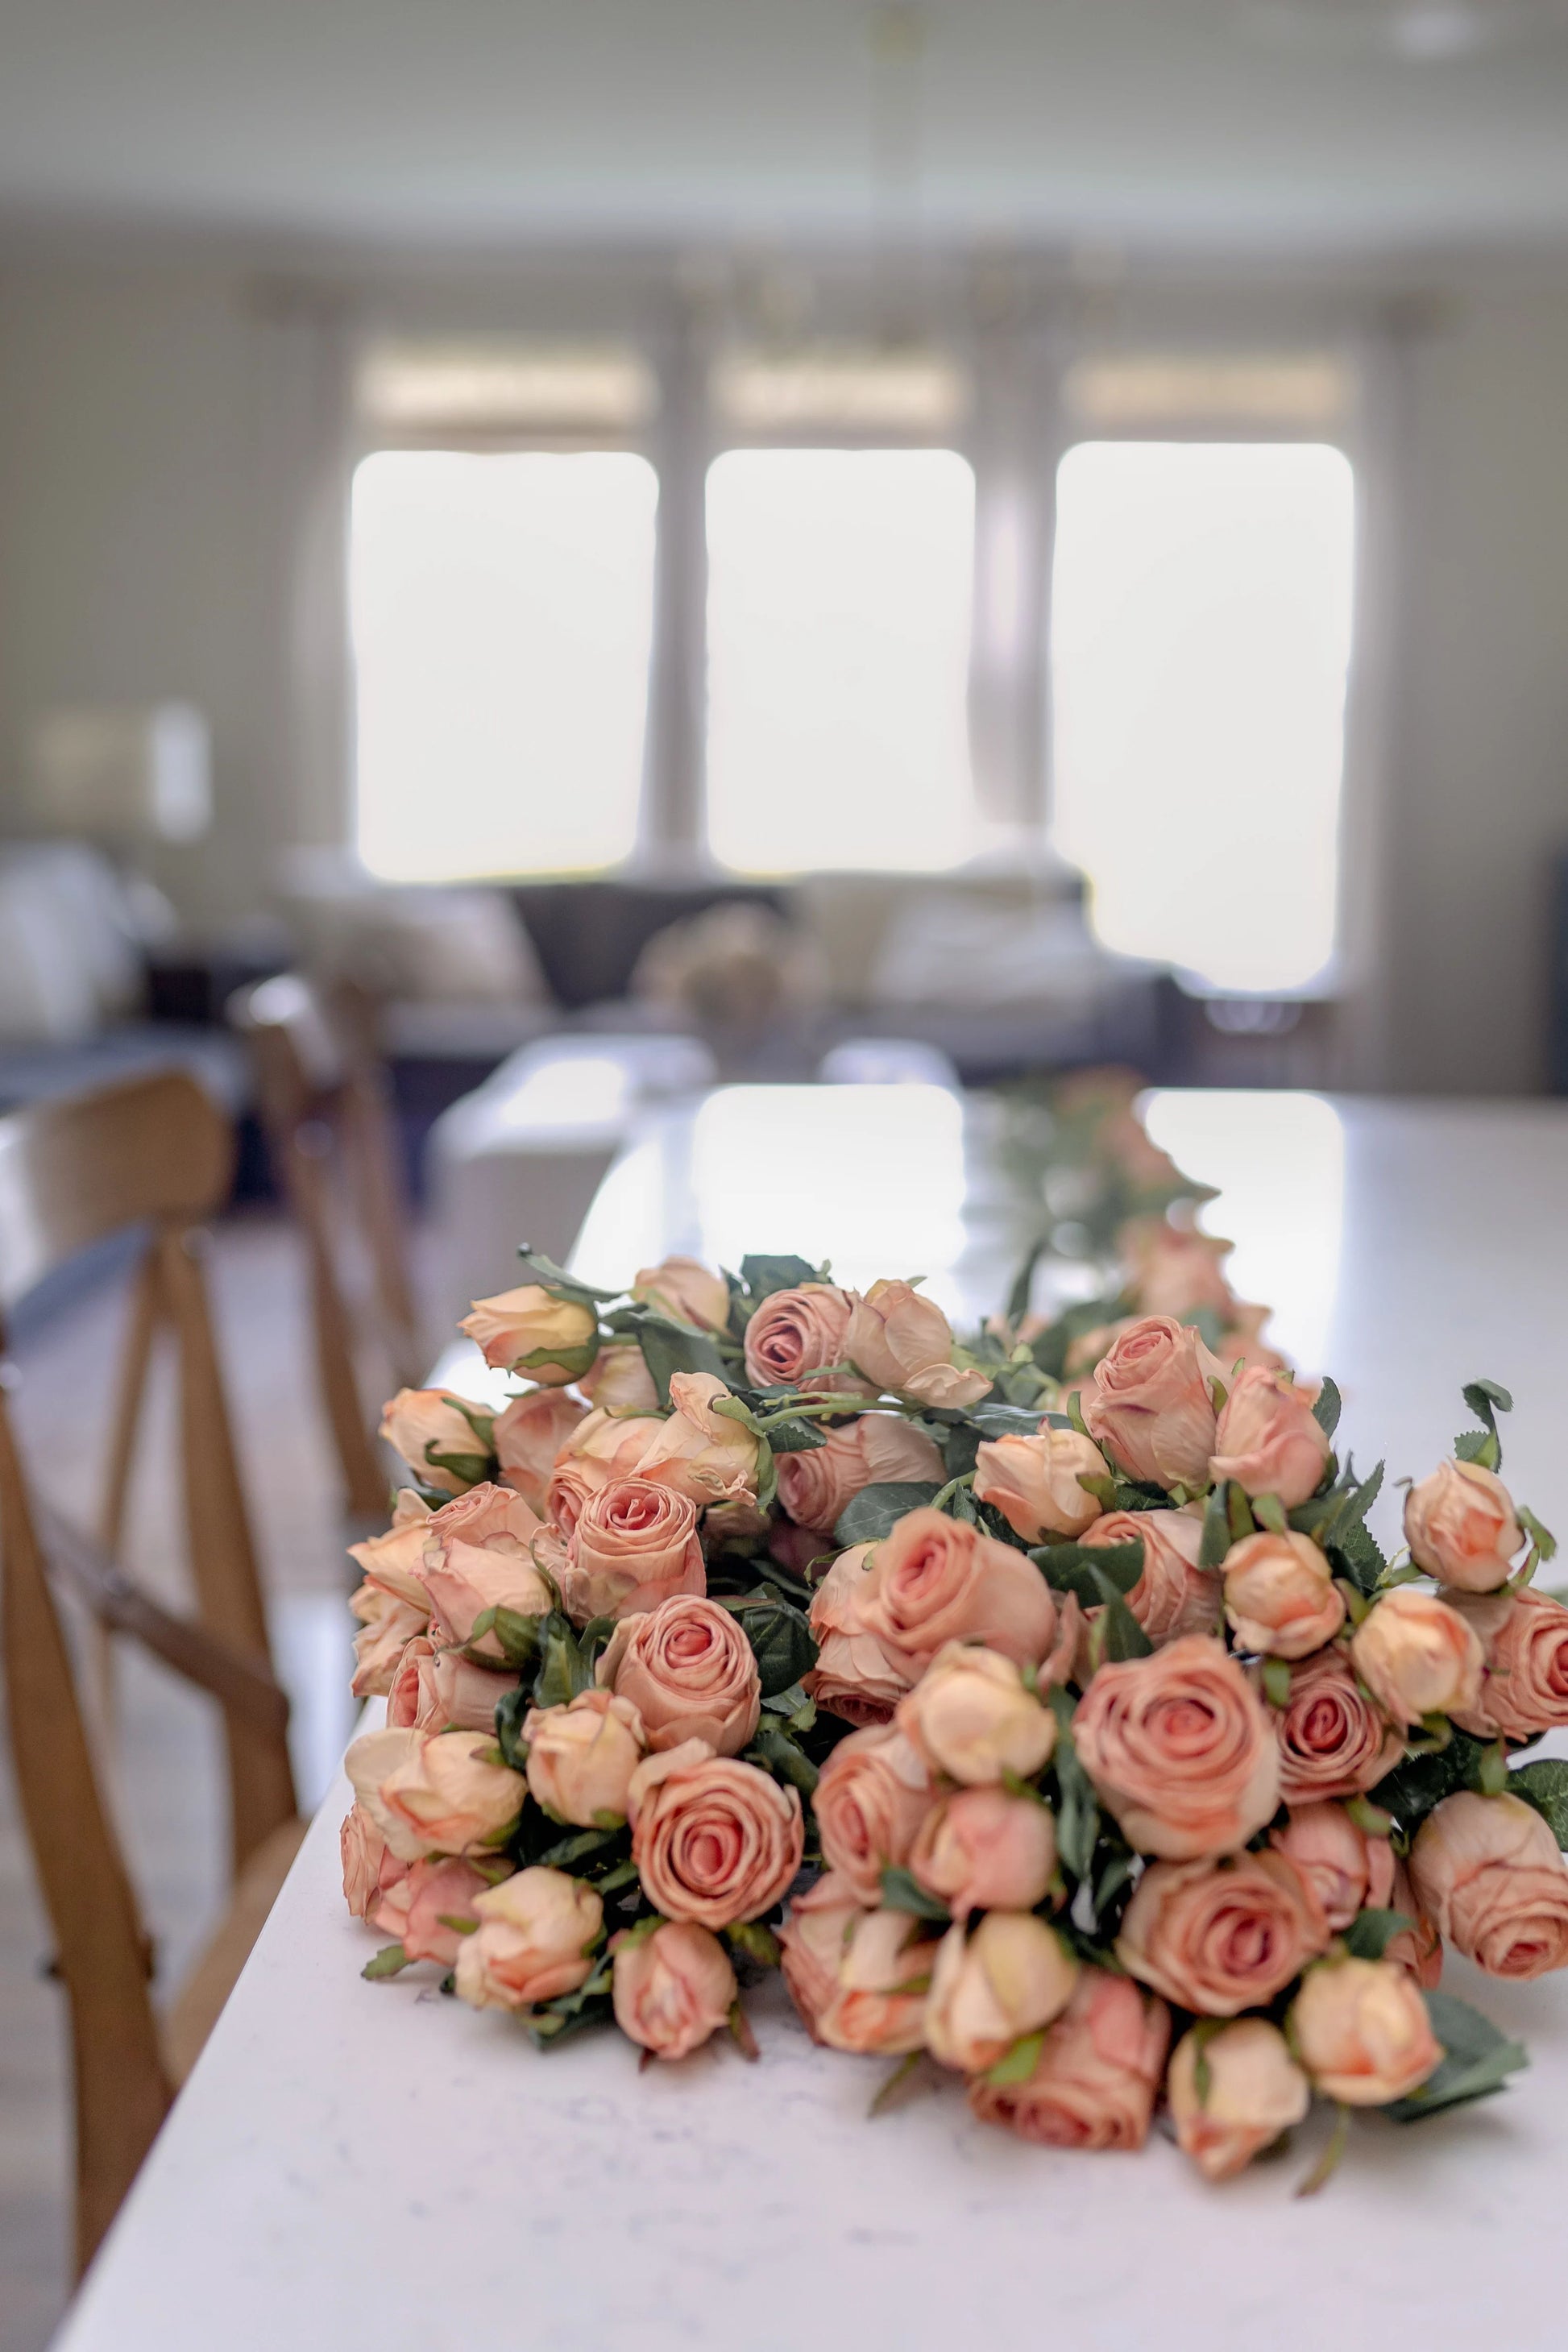 An image of a large bouquet of blush pink artificial roses crafted to look like preserved roses. The roses have a pink color with light brown edging to give the appearance of being dried. Each stem is 14 inches tall and features two lifelike flower heads with green leaves. The bouquet is showcased on a kitchen counter to provide a lifestyle image feel. 